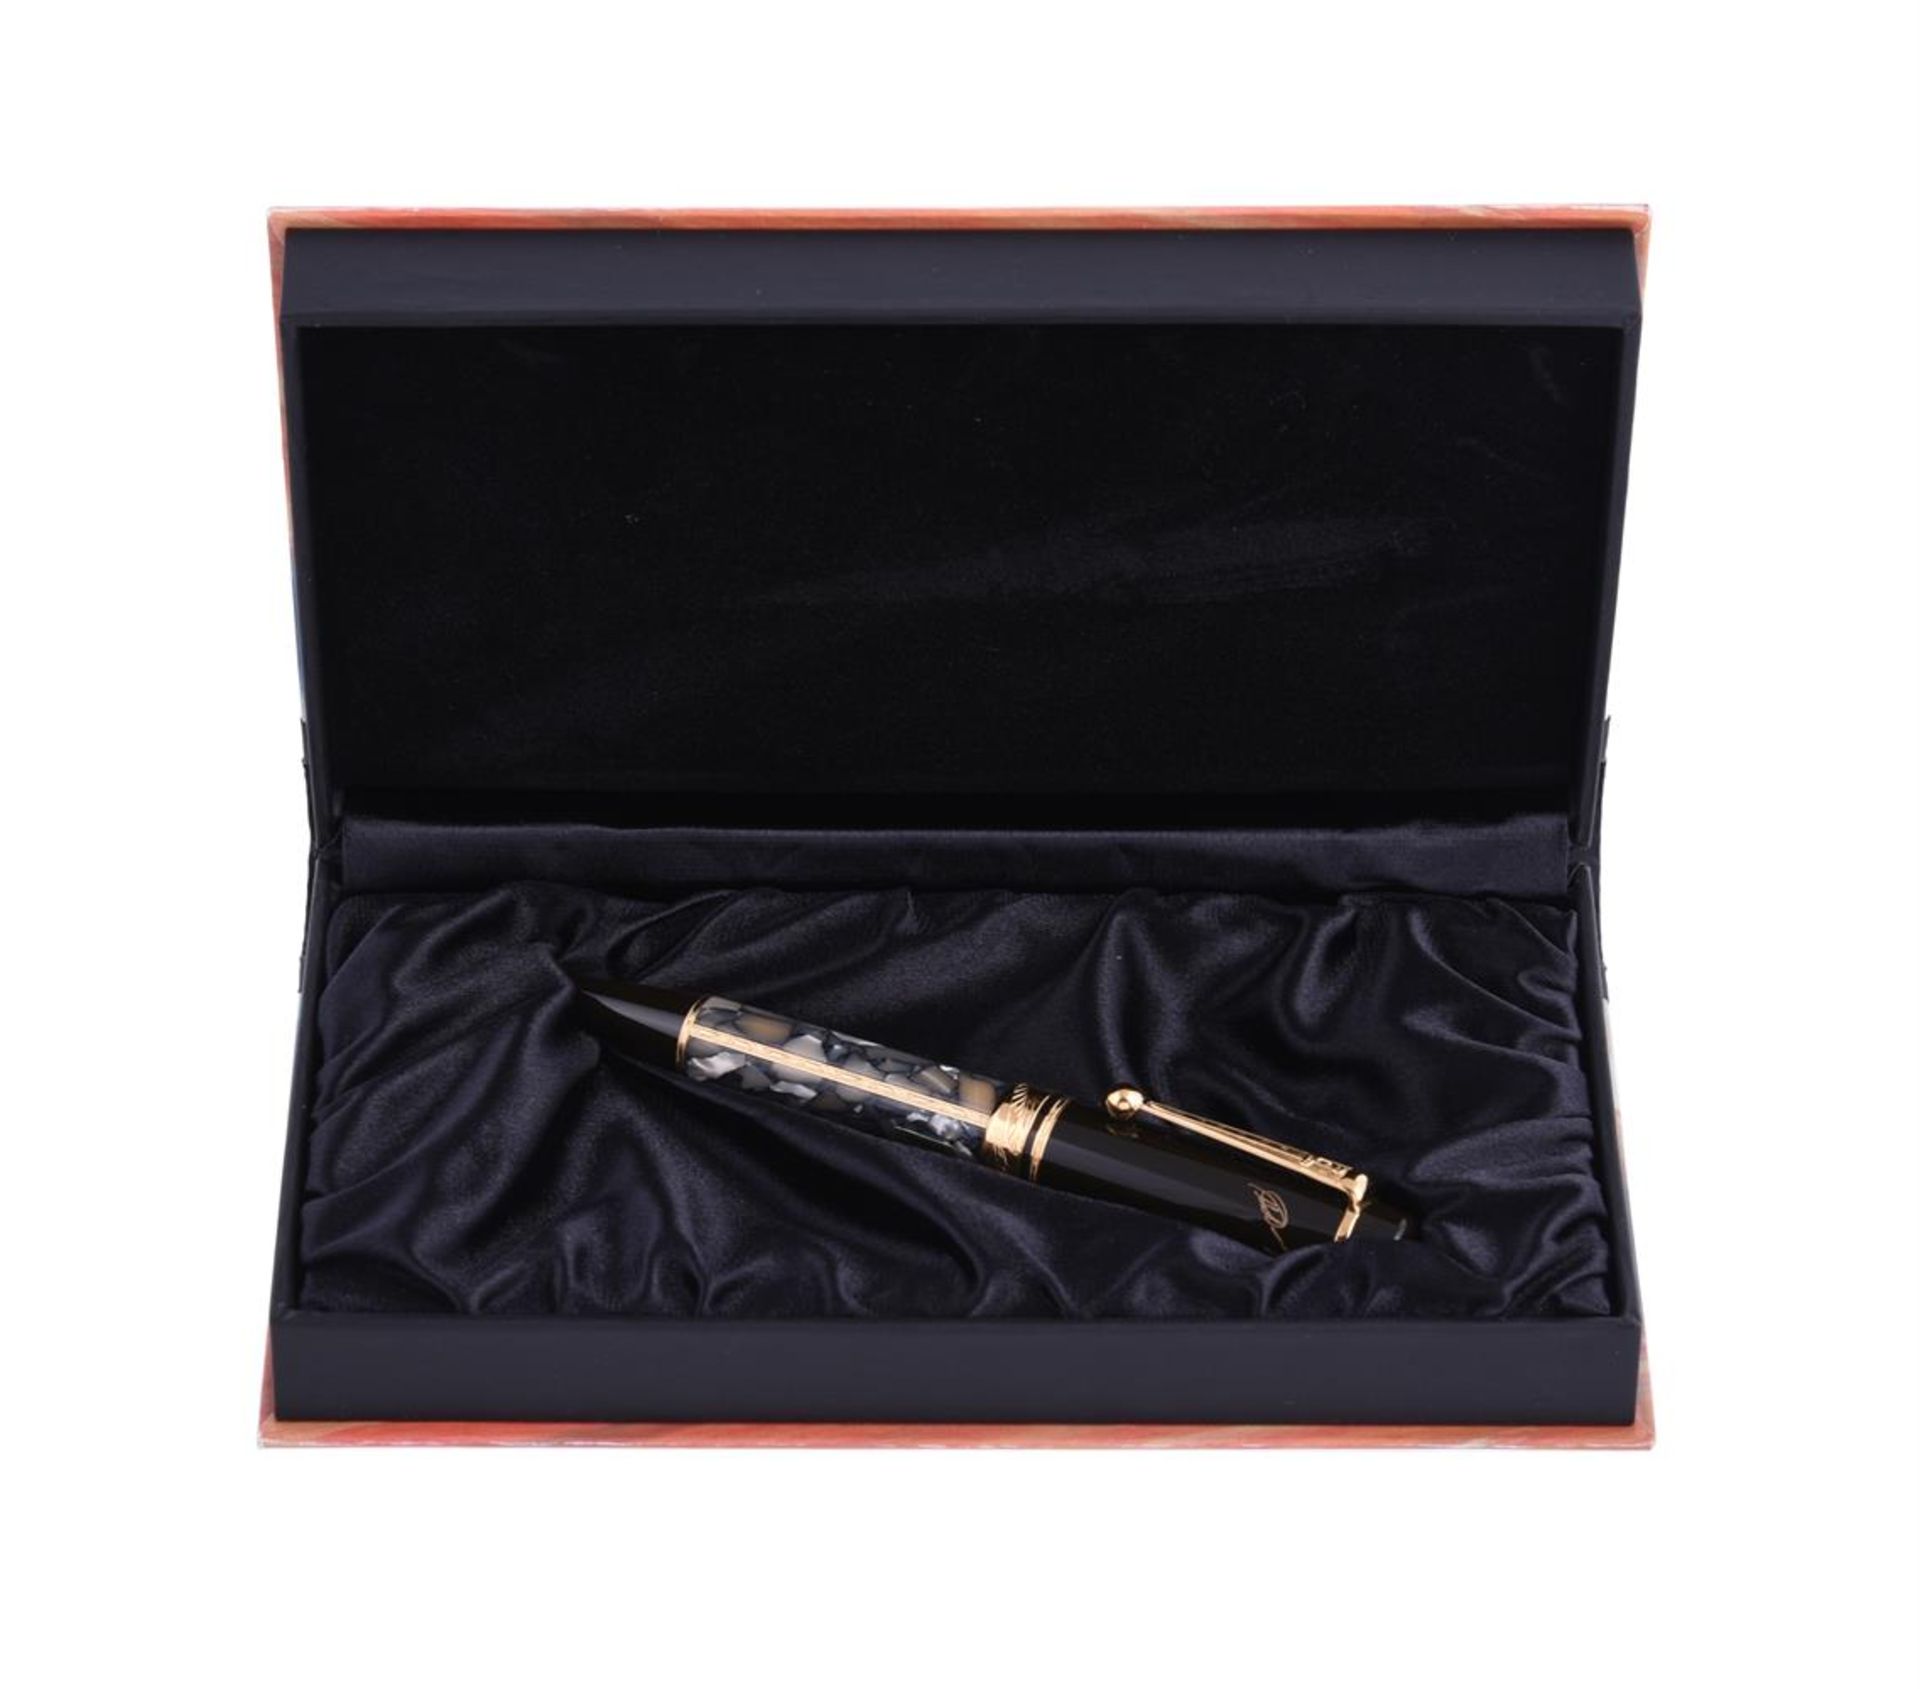 MONTBLANC, WRITERS EDITION, ALEXANDRE DUMAS, A LIMITED EDITION BALLPOINT PEN - Image 2 of 2